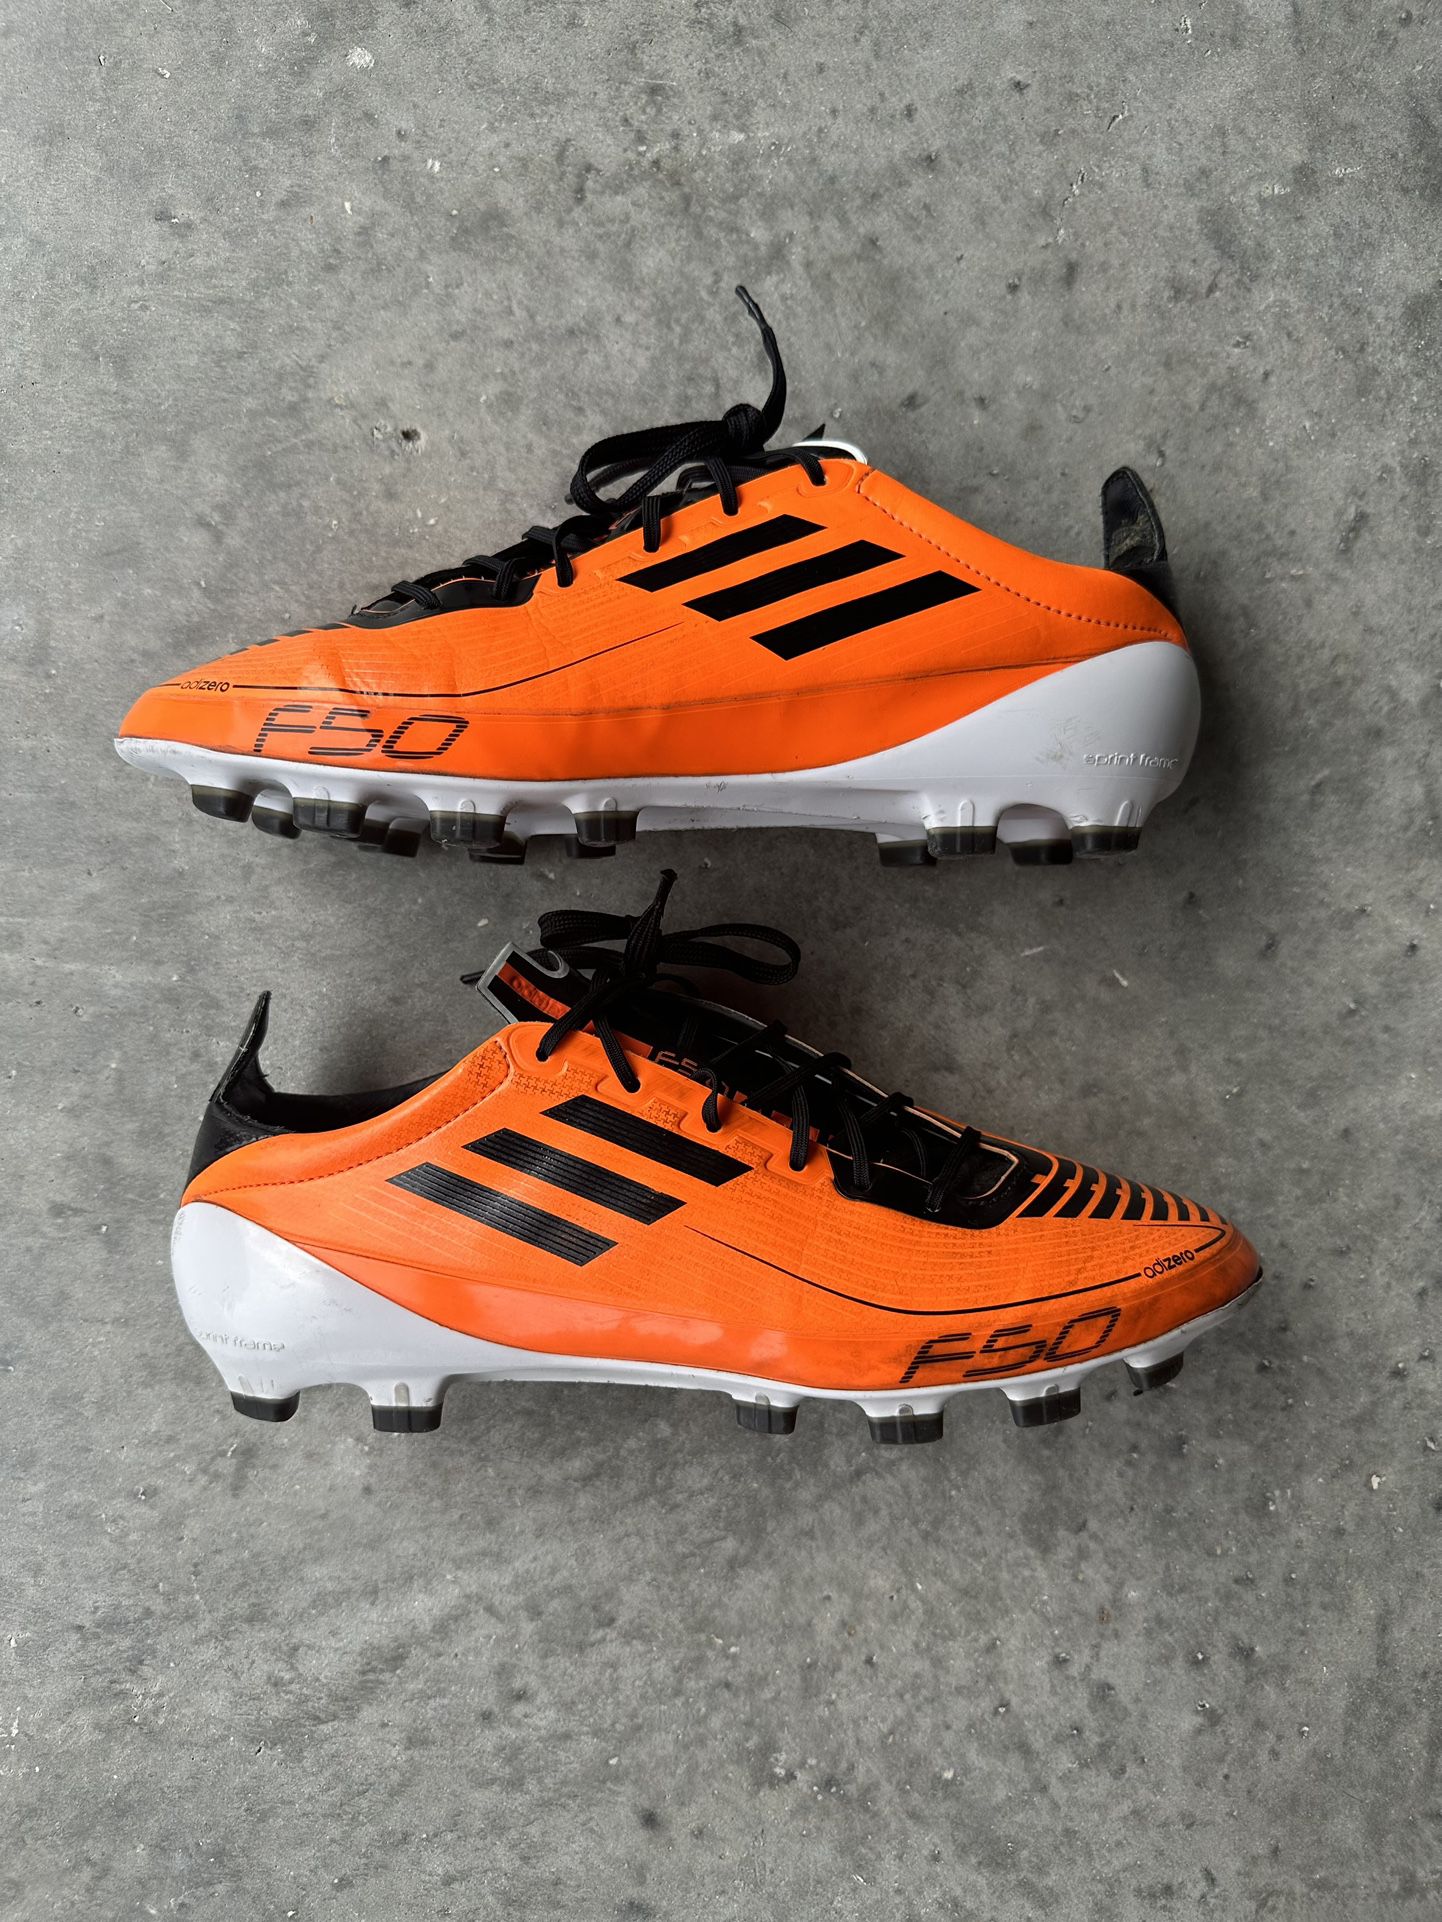 ADIDAS f50 ADIZERO FG SIZE 8.5 SOCCER CLEATS for Sale in Port St. Lucie, - OfferUp